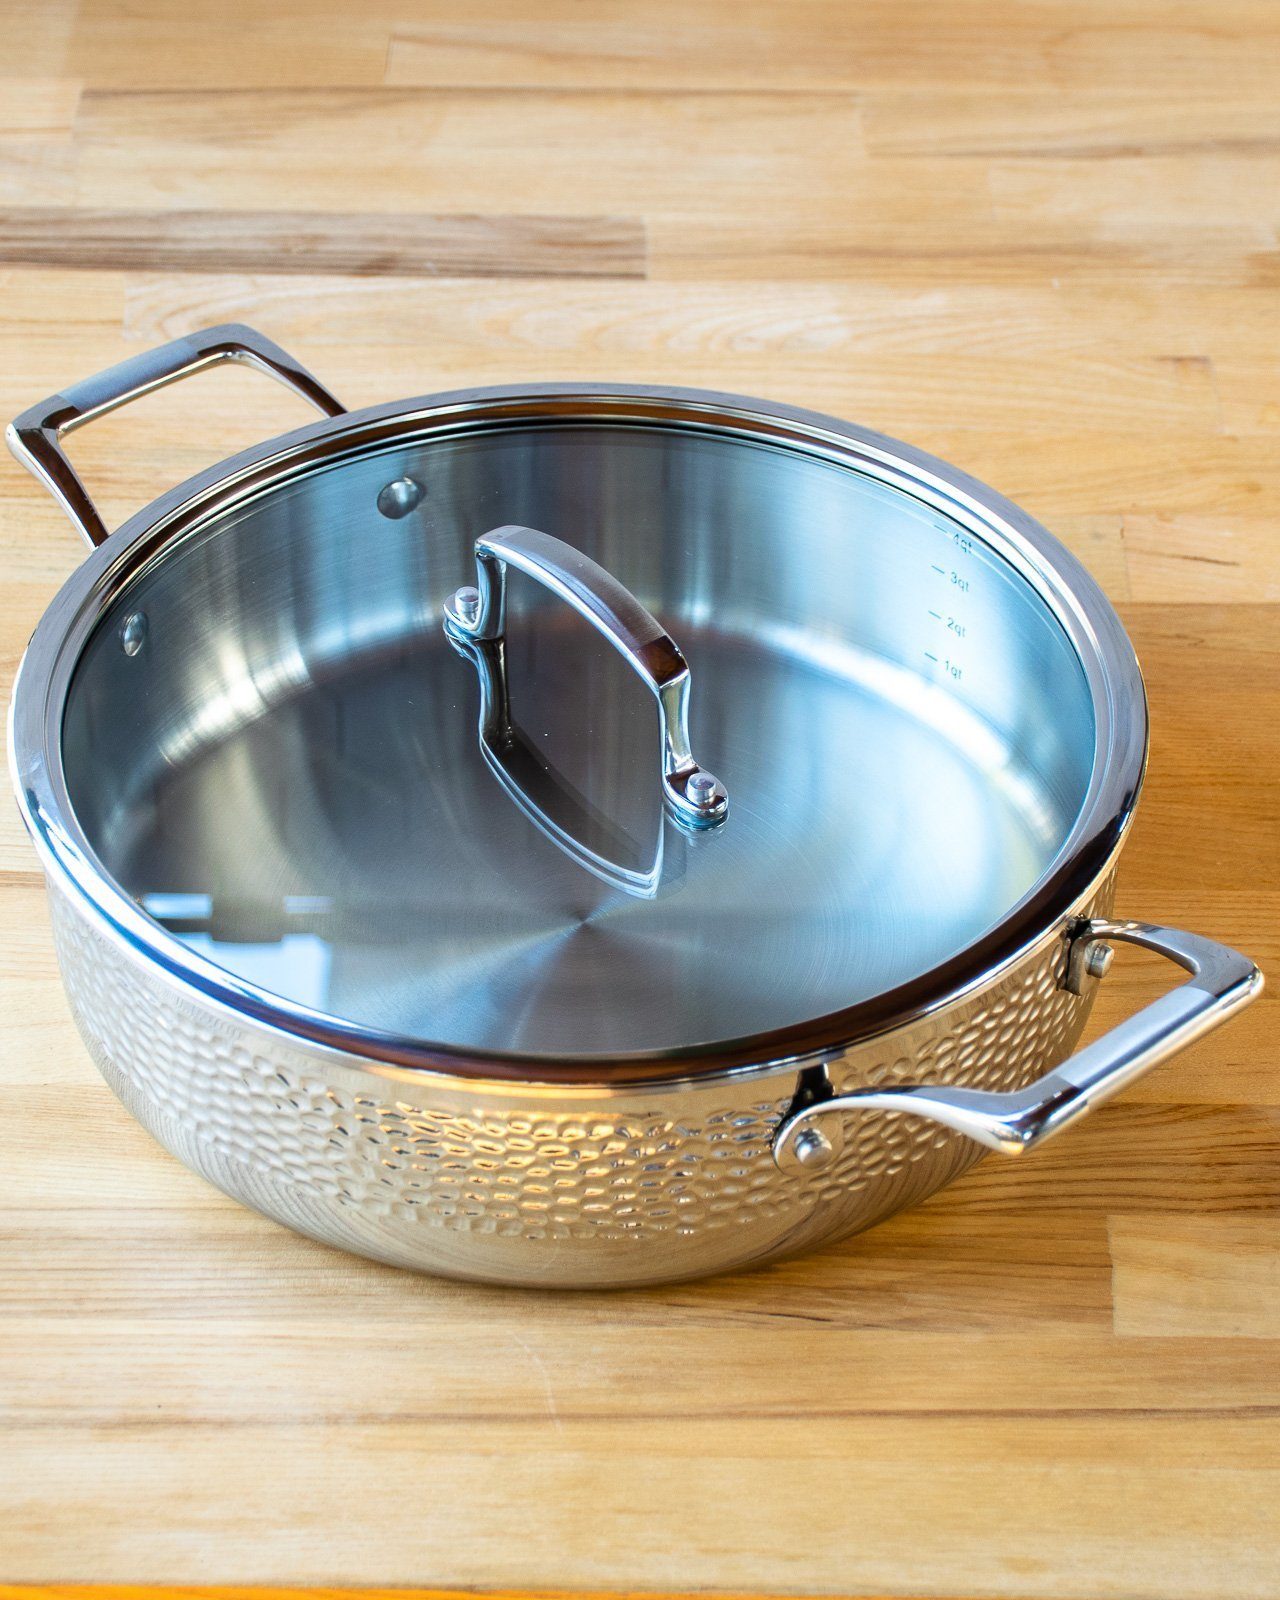 All-Clad D3 Armor Oval Fish Pan Review: Best Fish Pan for the Stovetop